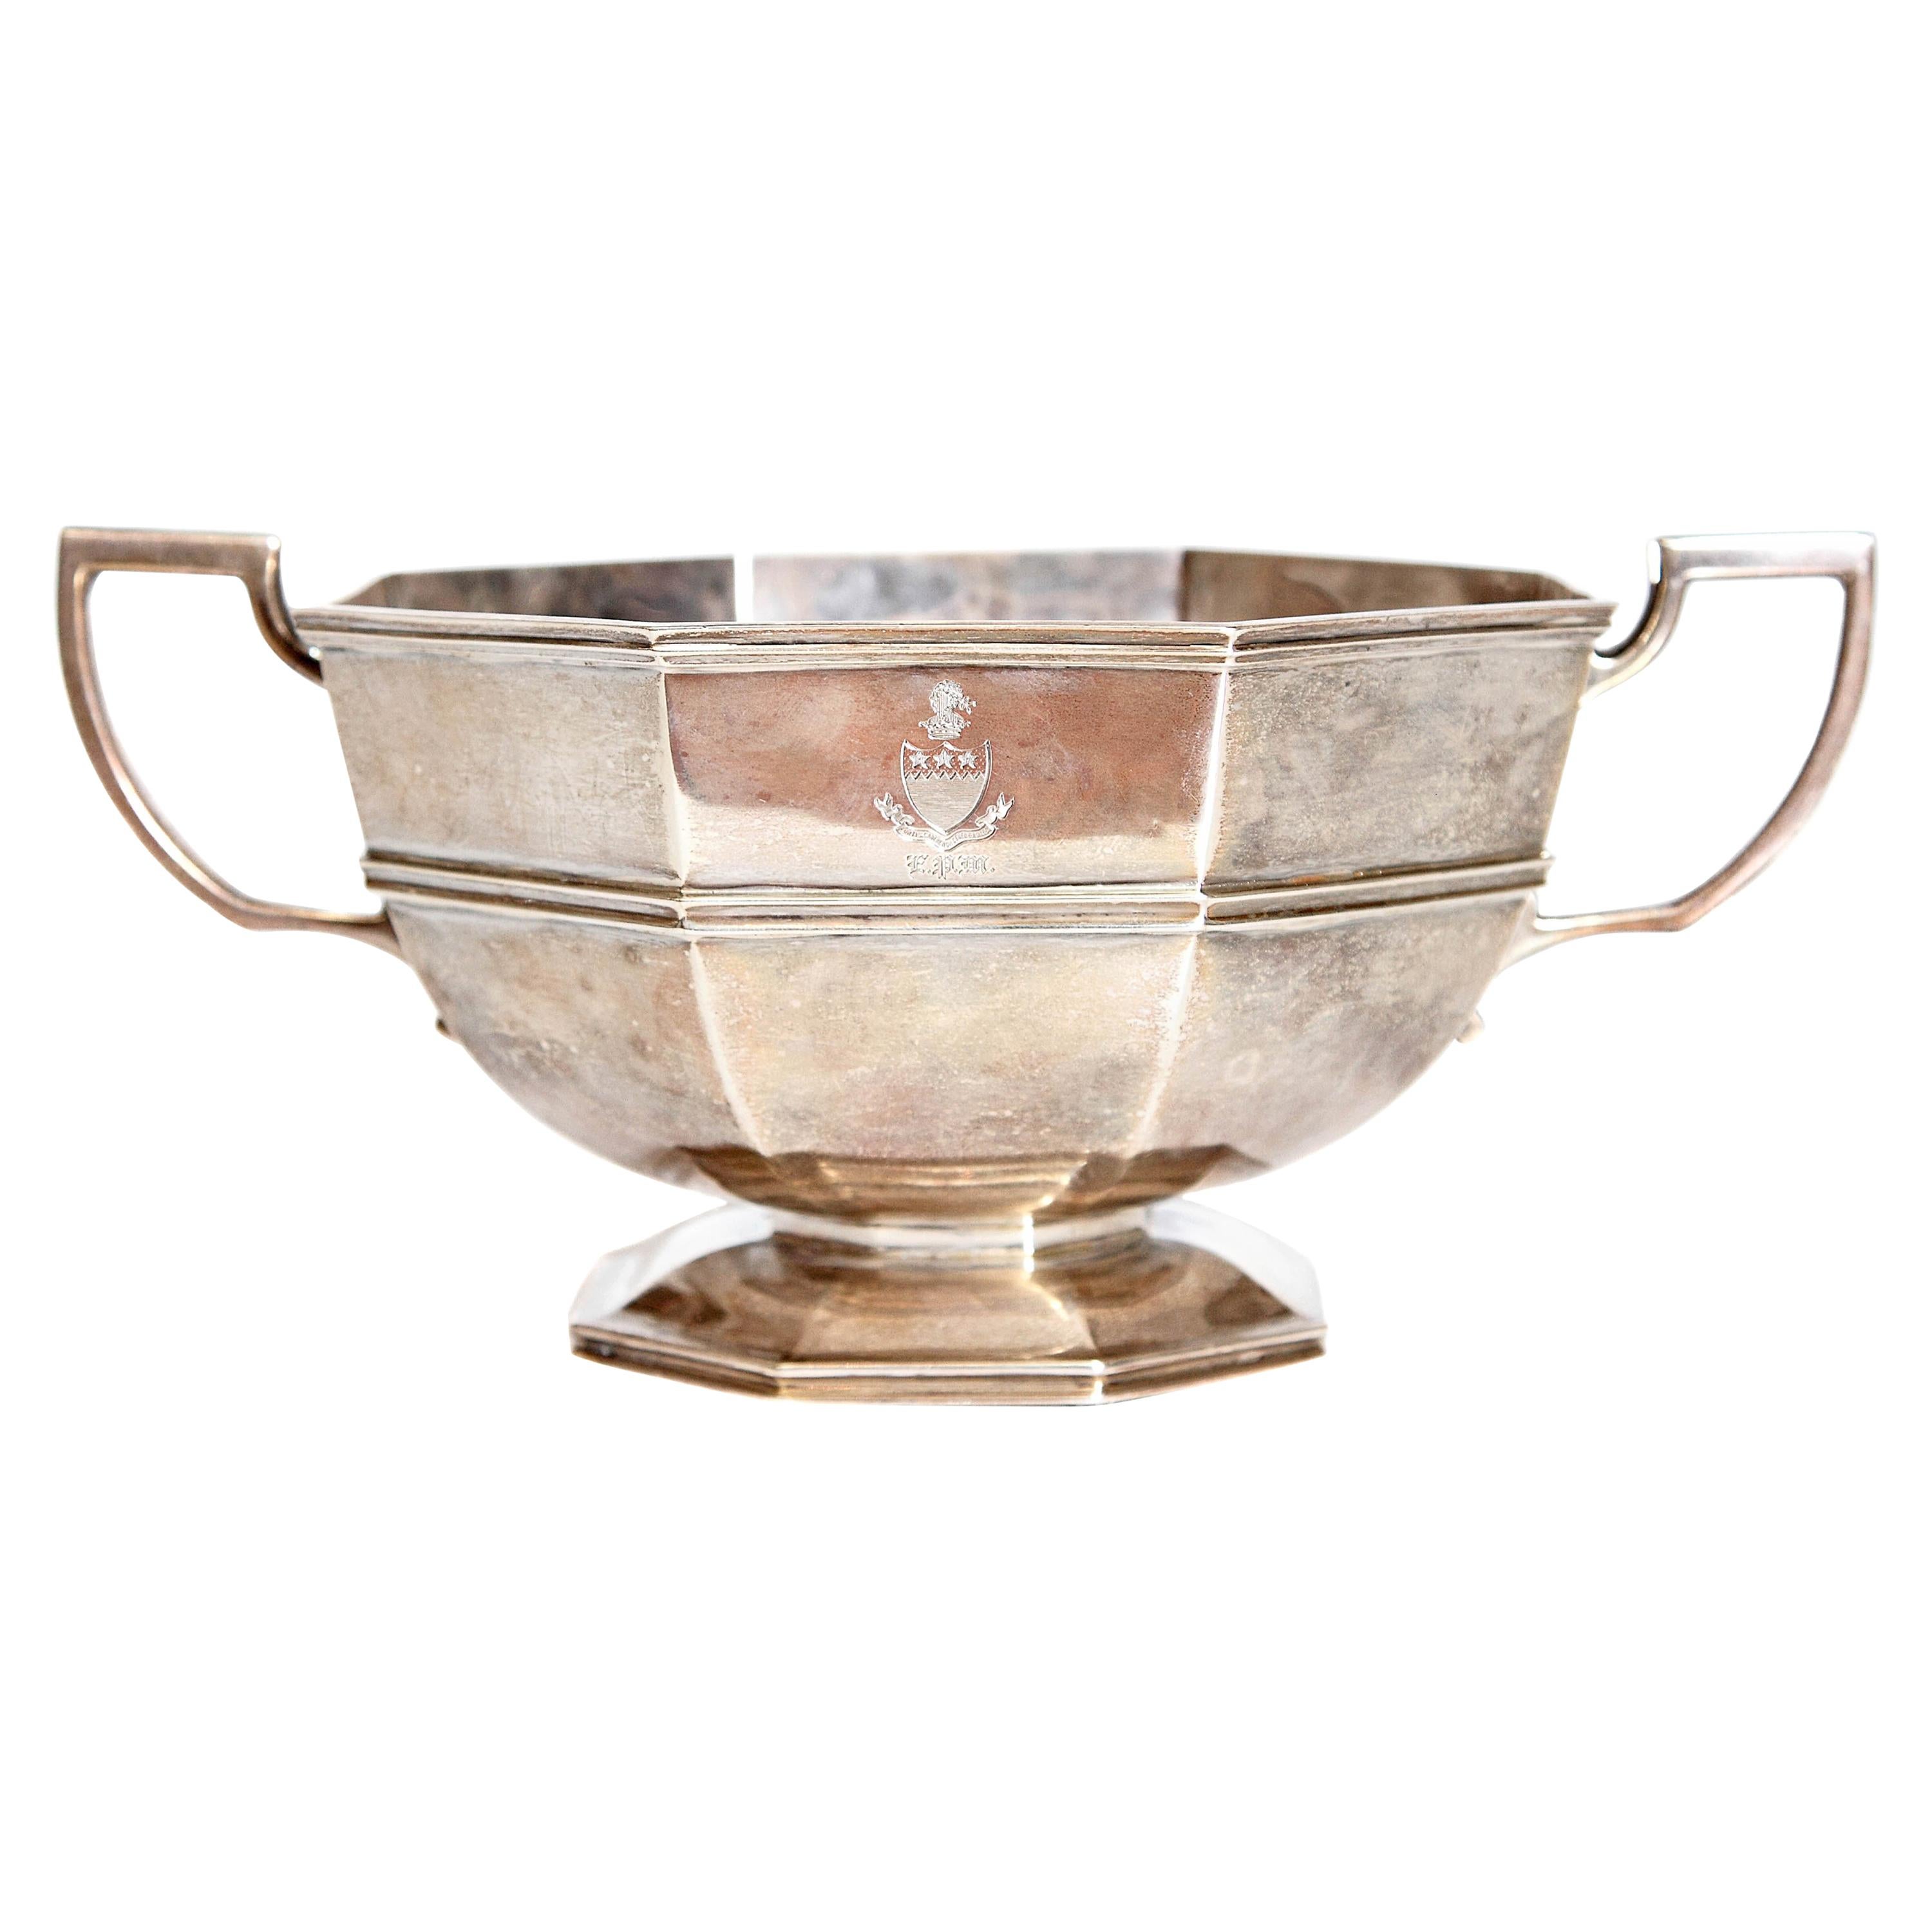 Armorial Silver Pedestal Bowl / Cup by C. C. Pilling for Tiffany & Co.